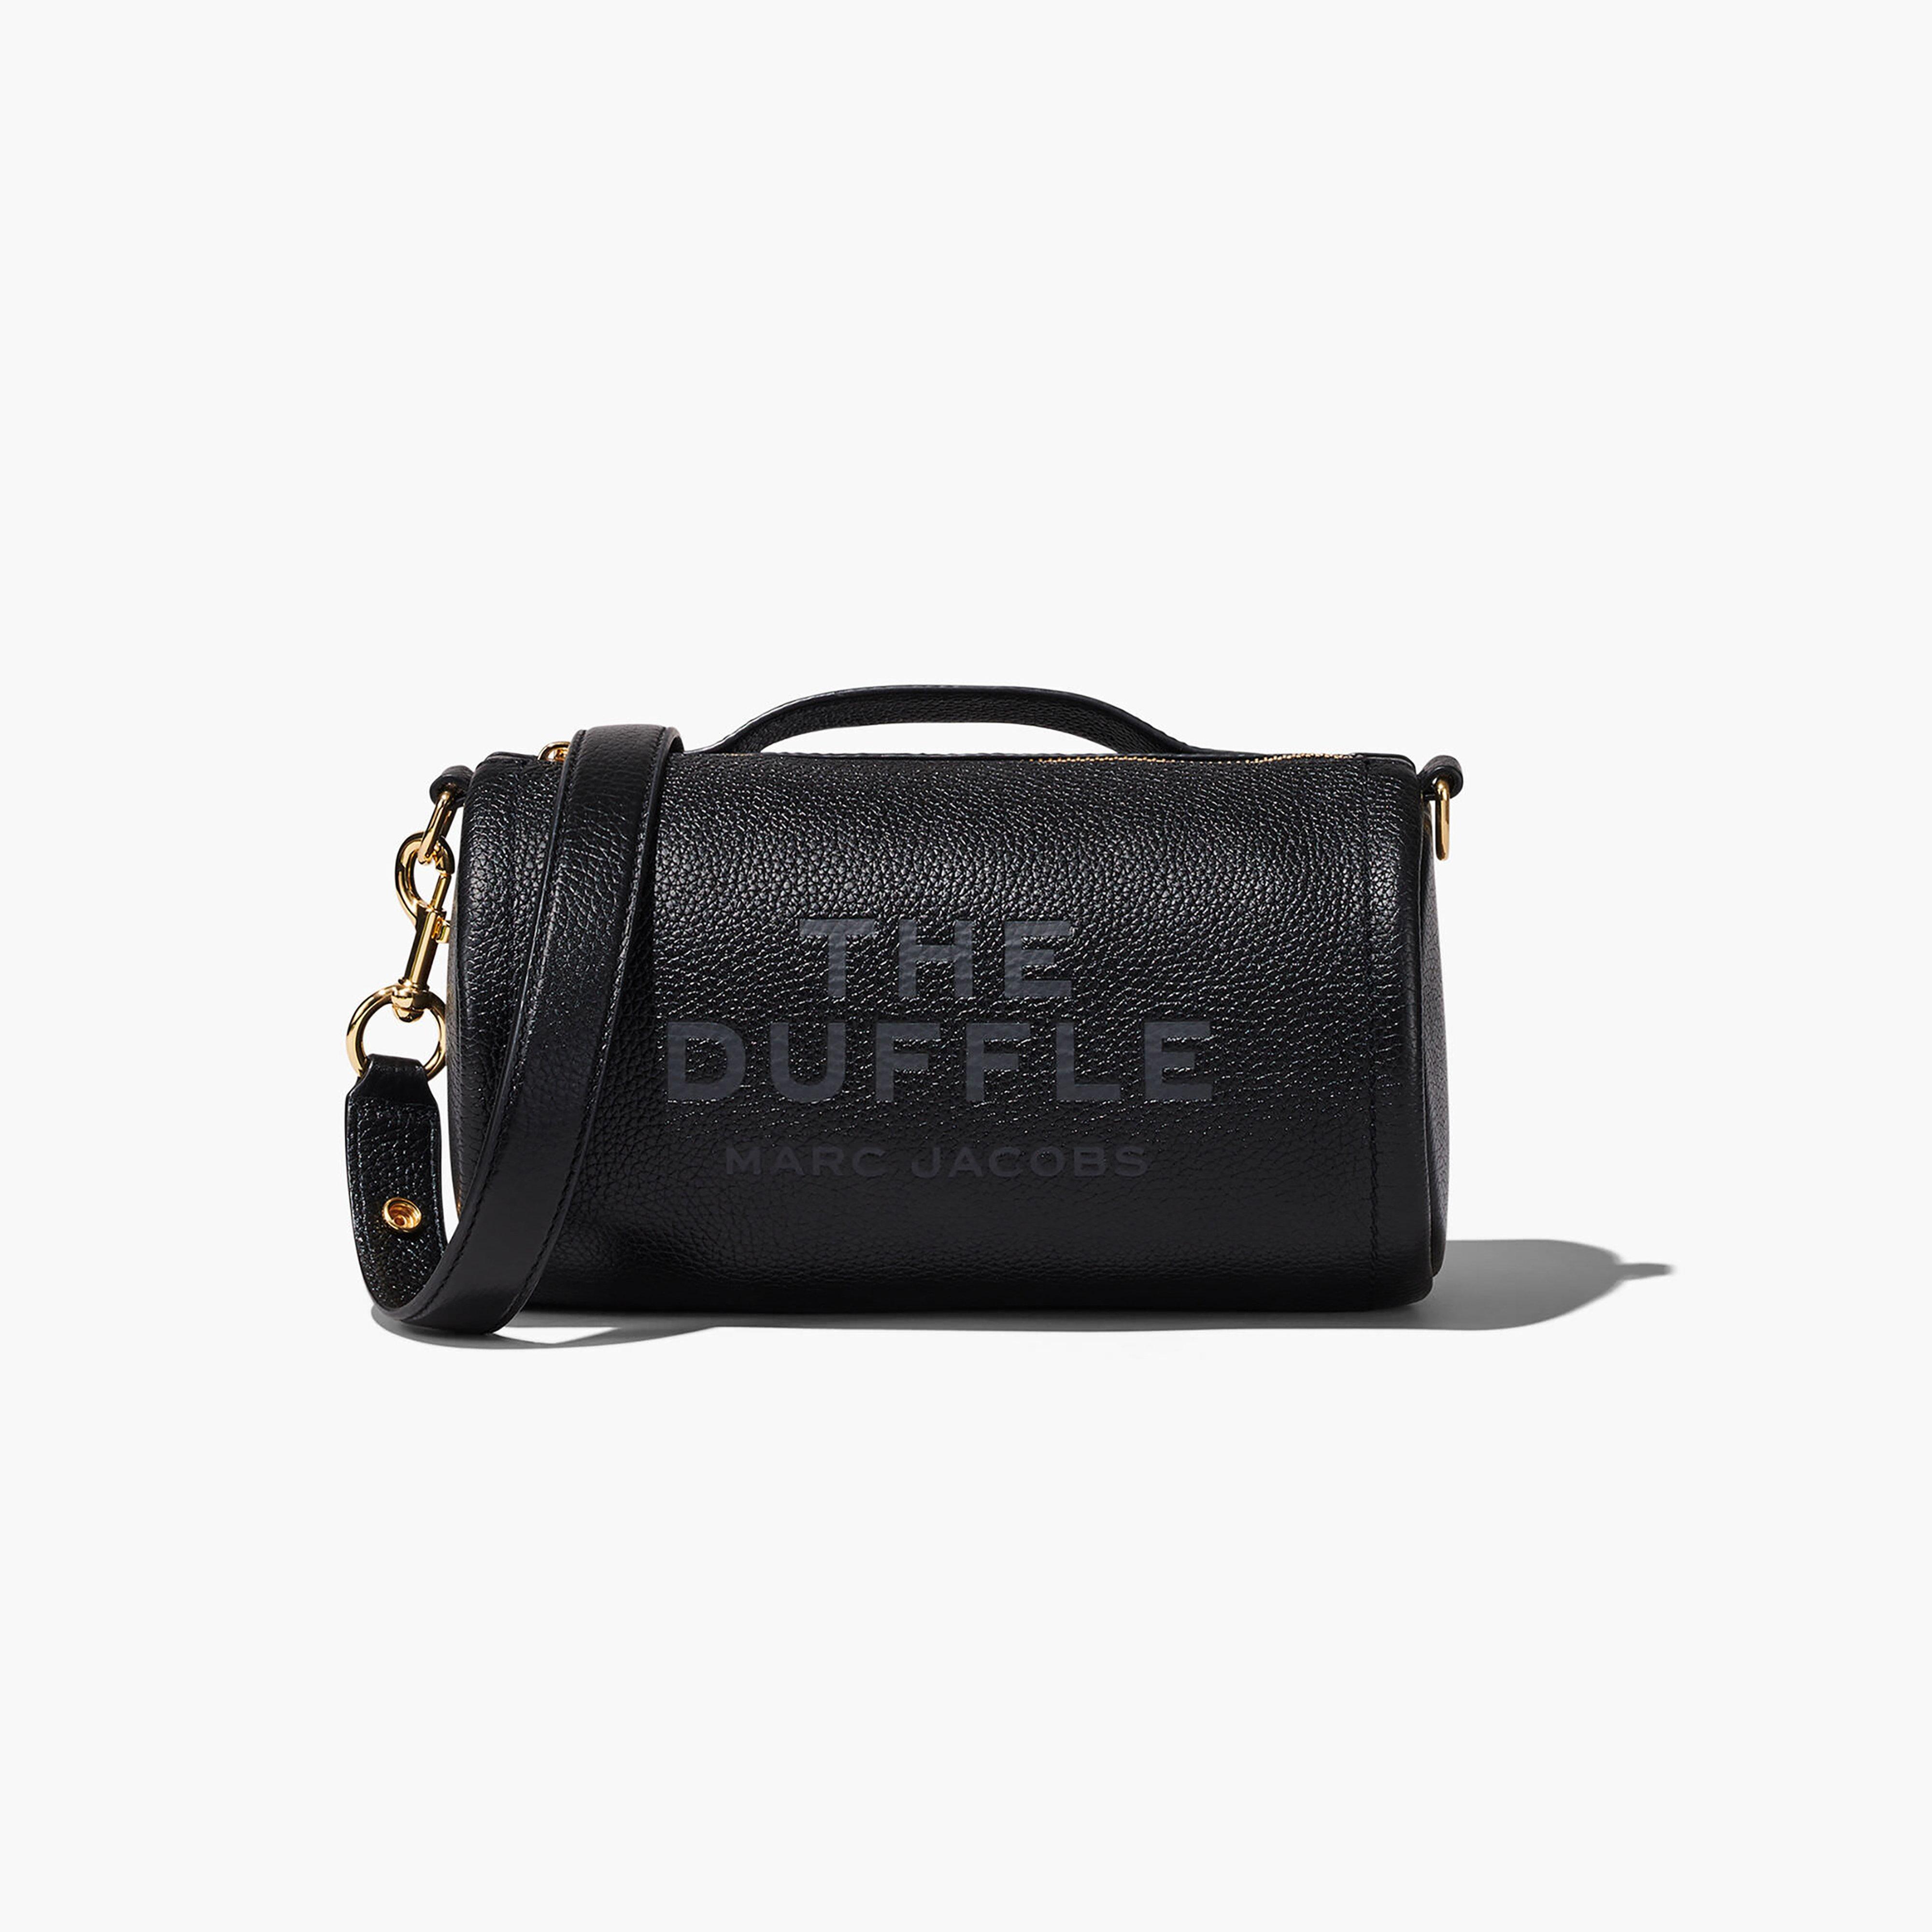 Marc by Marc jacobs The Leather Duffle Bag,BLACK